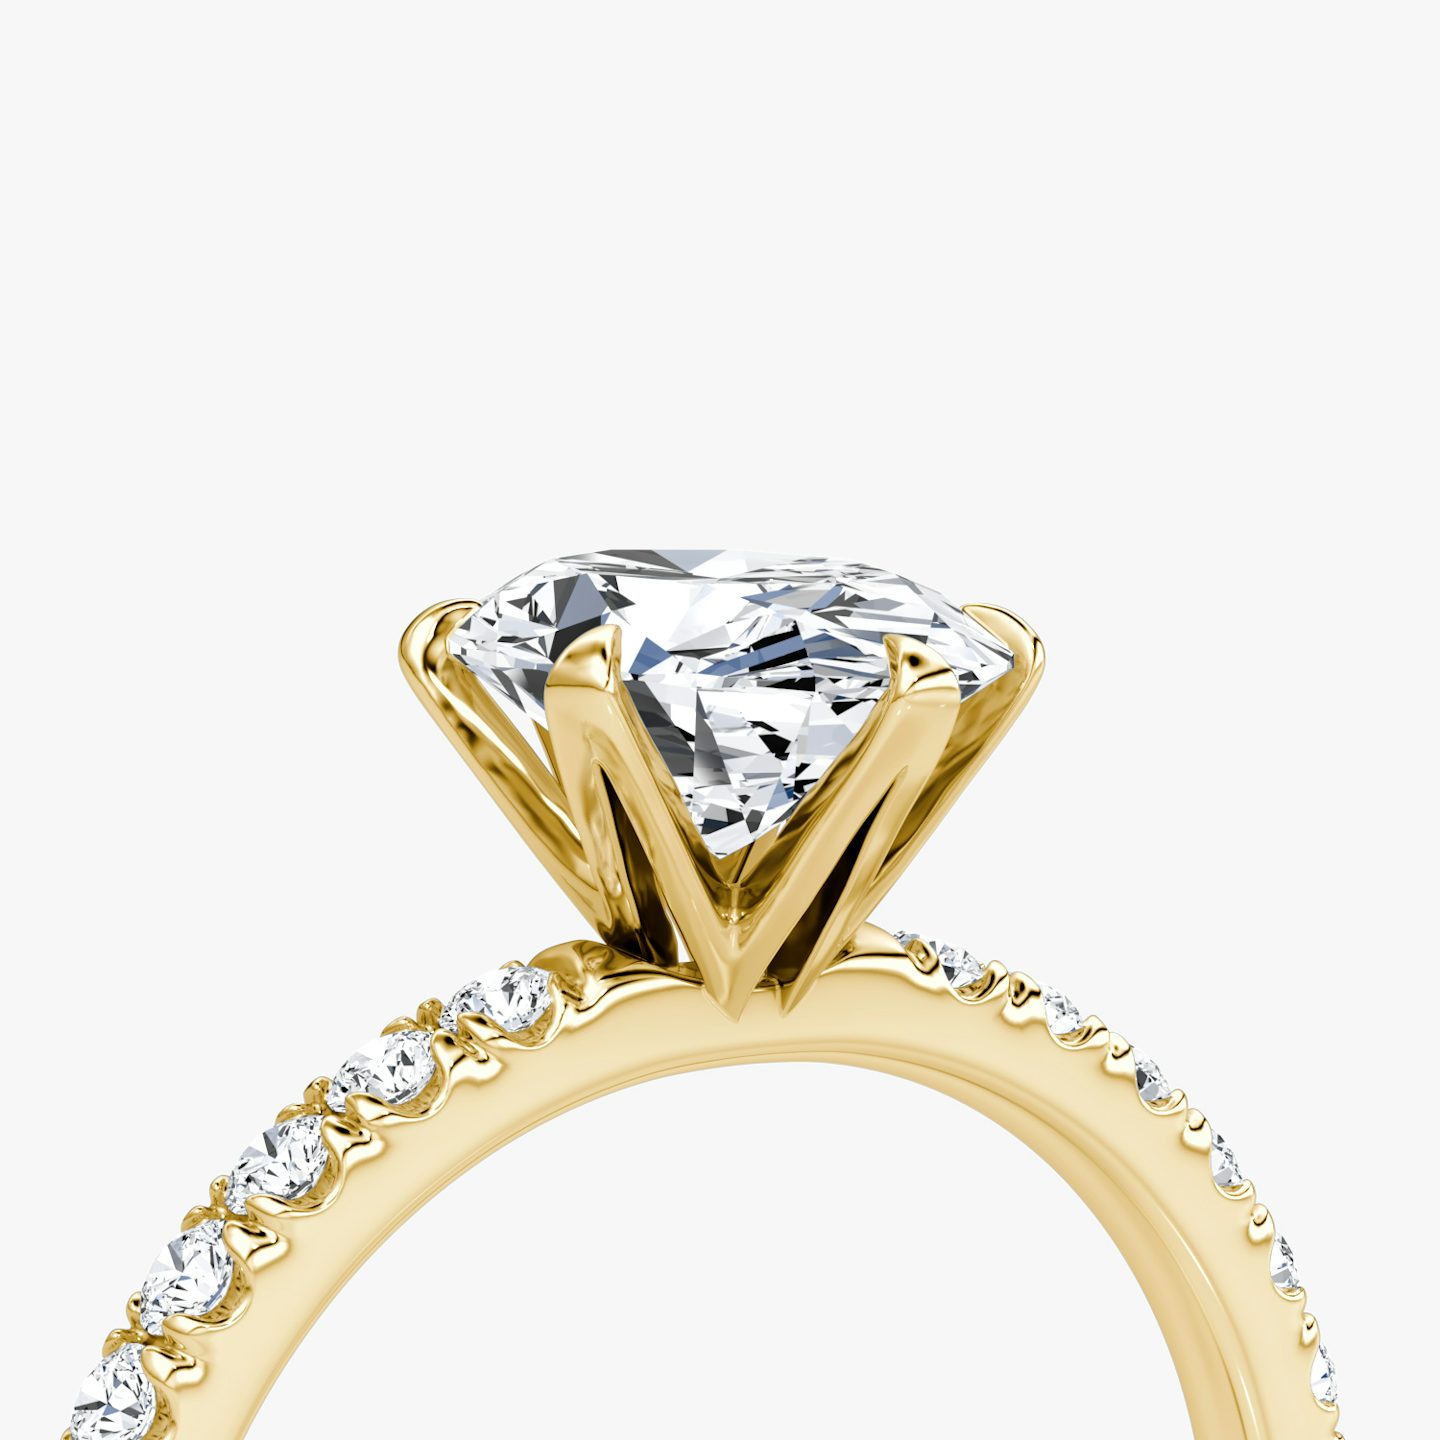 V | oval | 18k | yellow-gold | bandAccent: pave | diamondOrientation: vertical | caratWeight: other